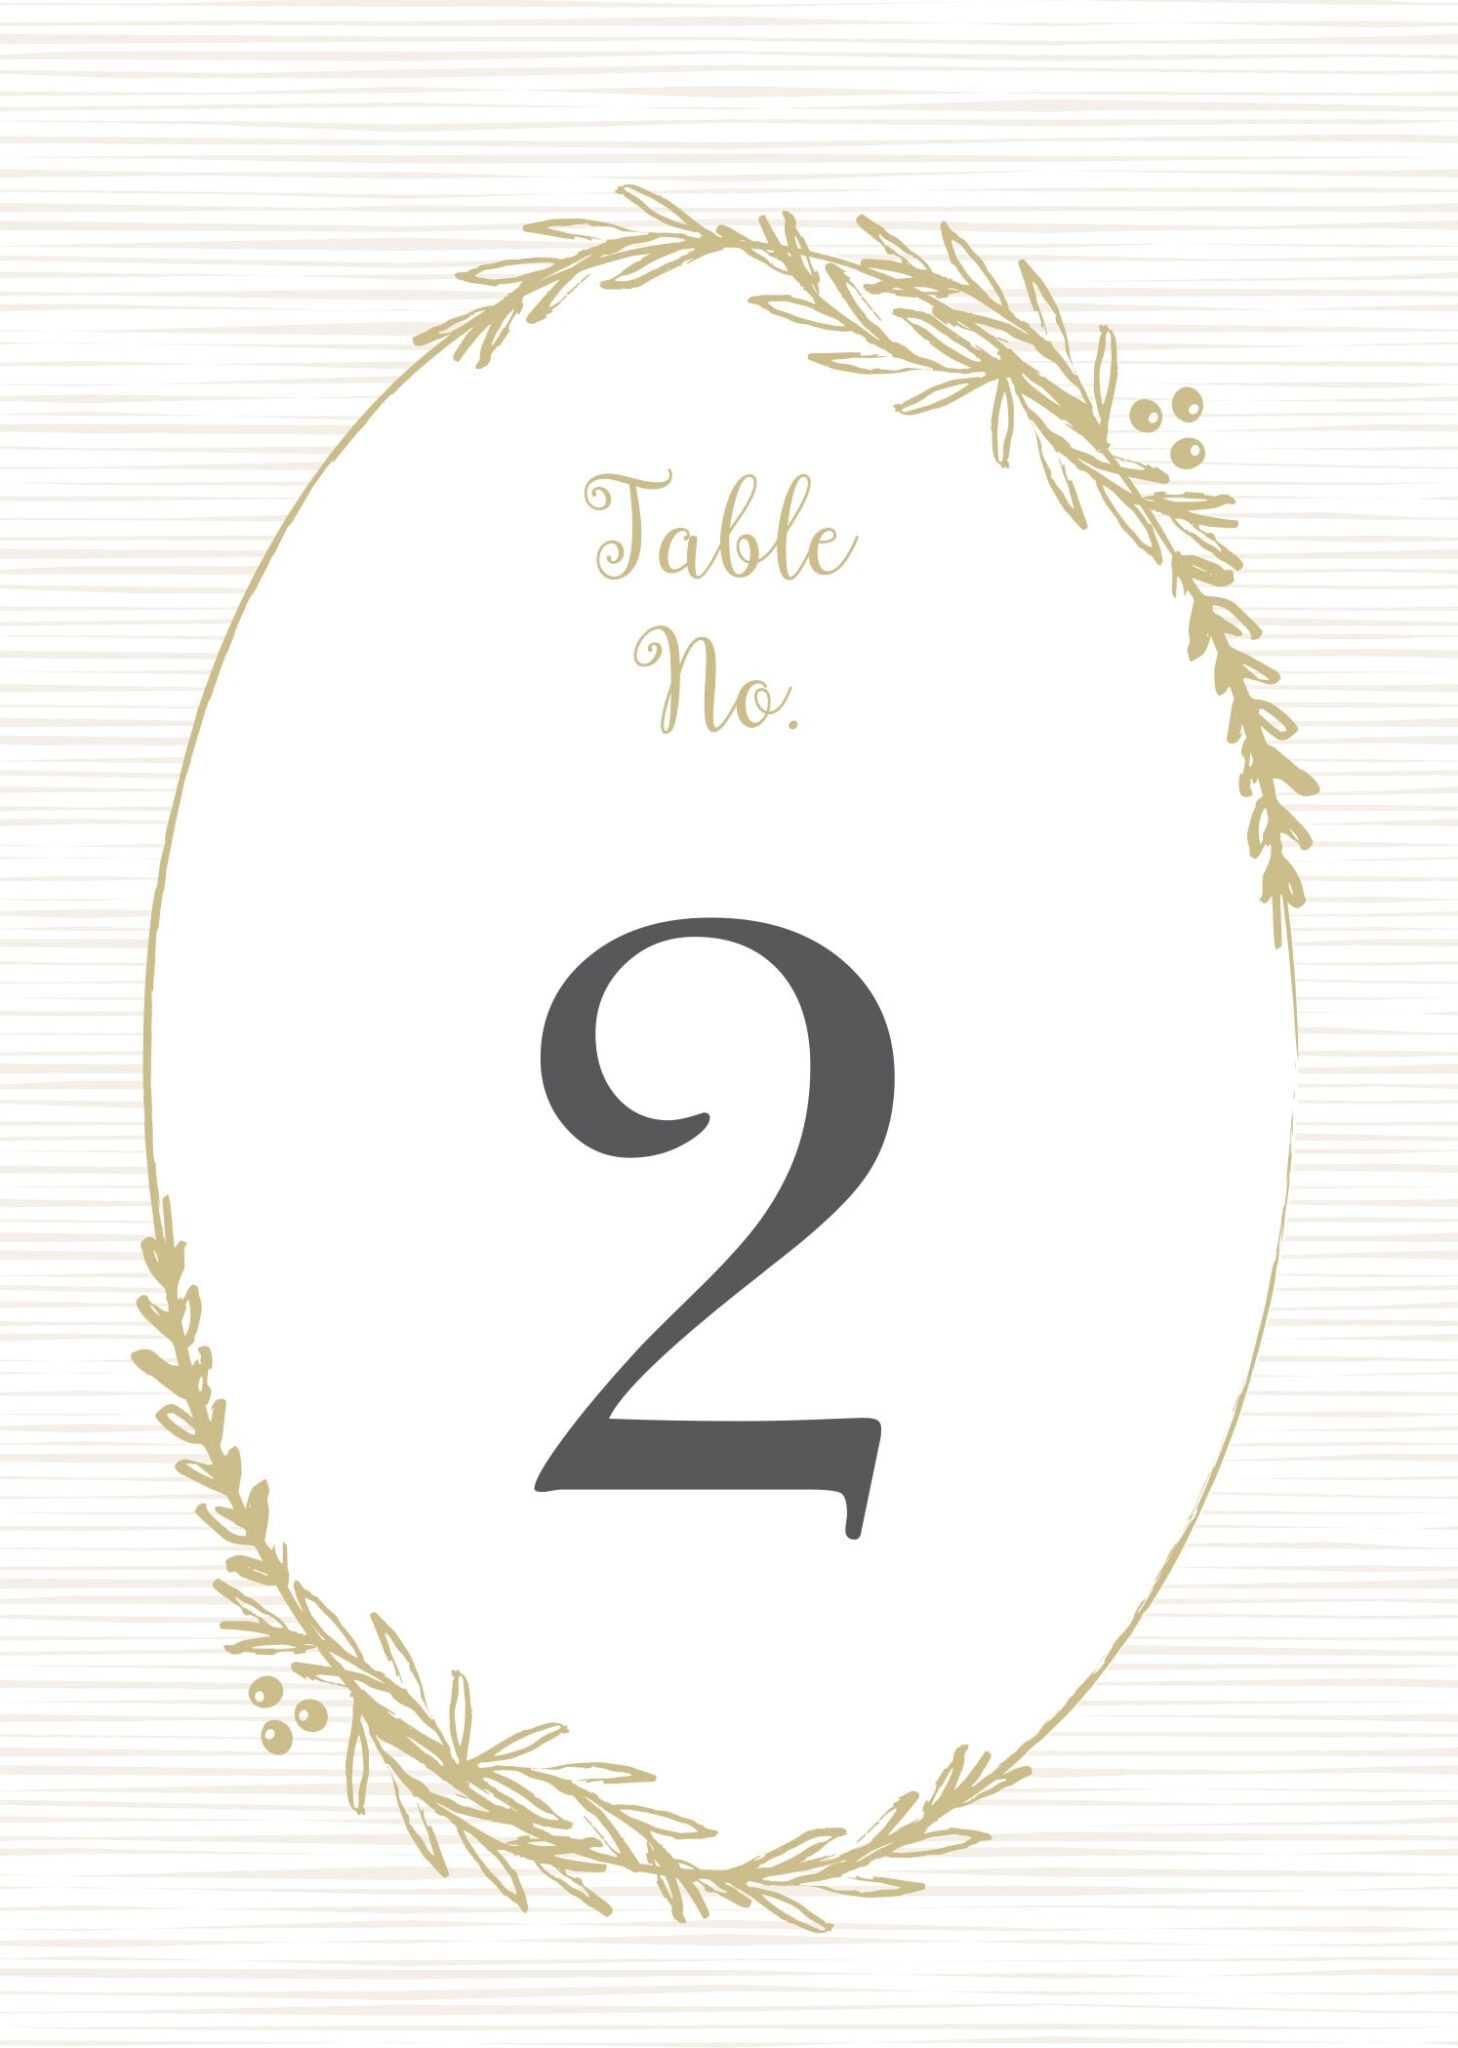 Wedding Table Numbers Printable Pdfbasic Invite For Table Number Cards Template Great Sample